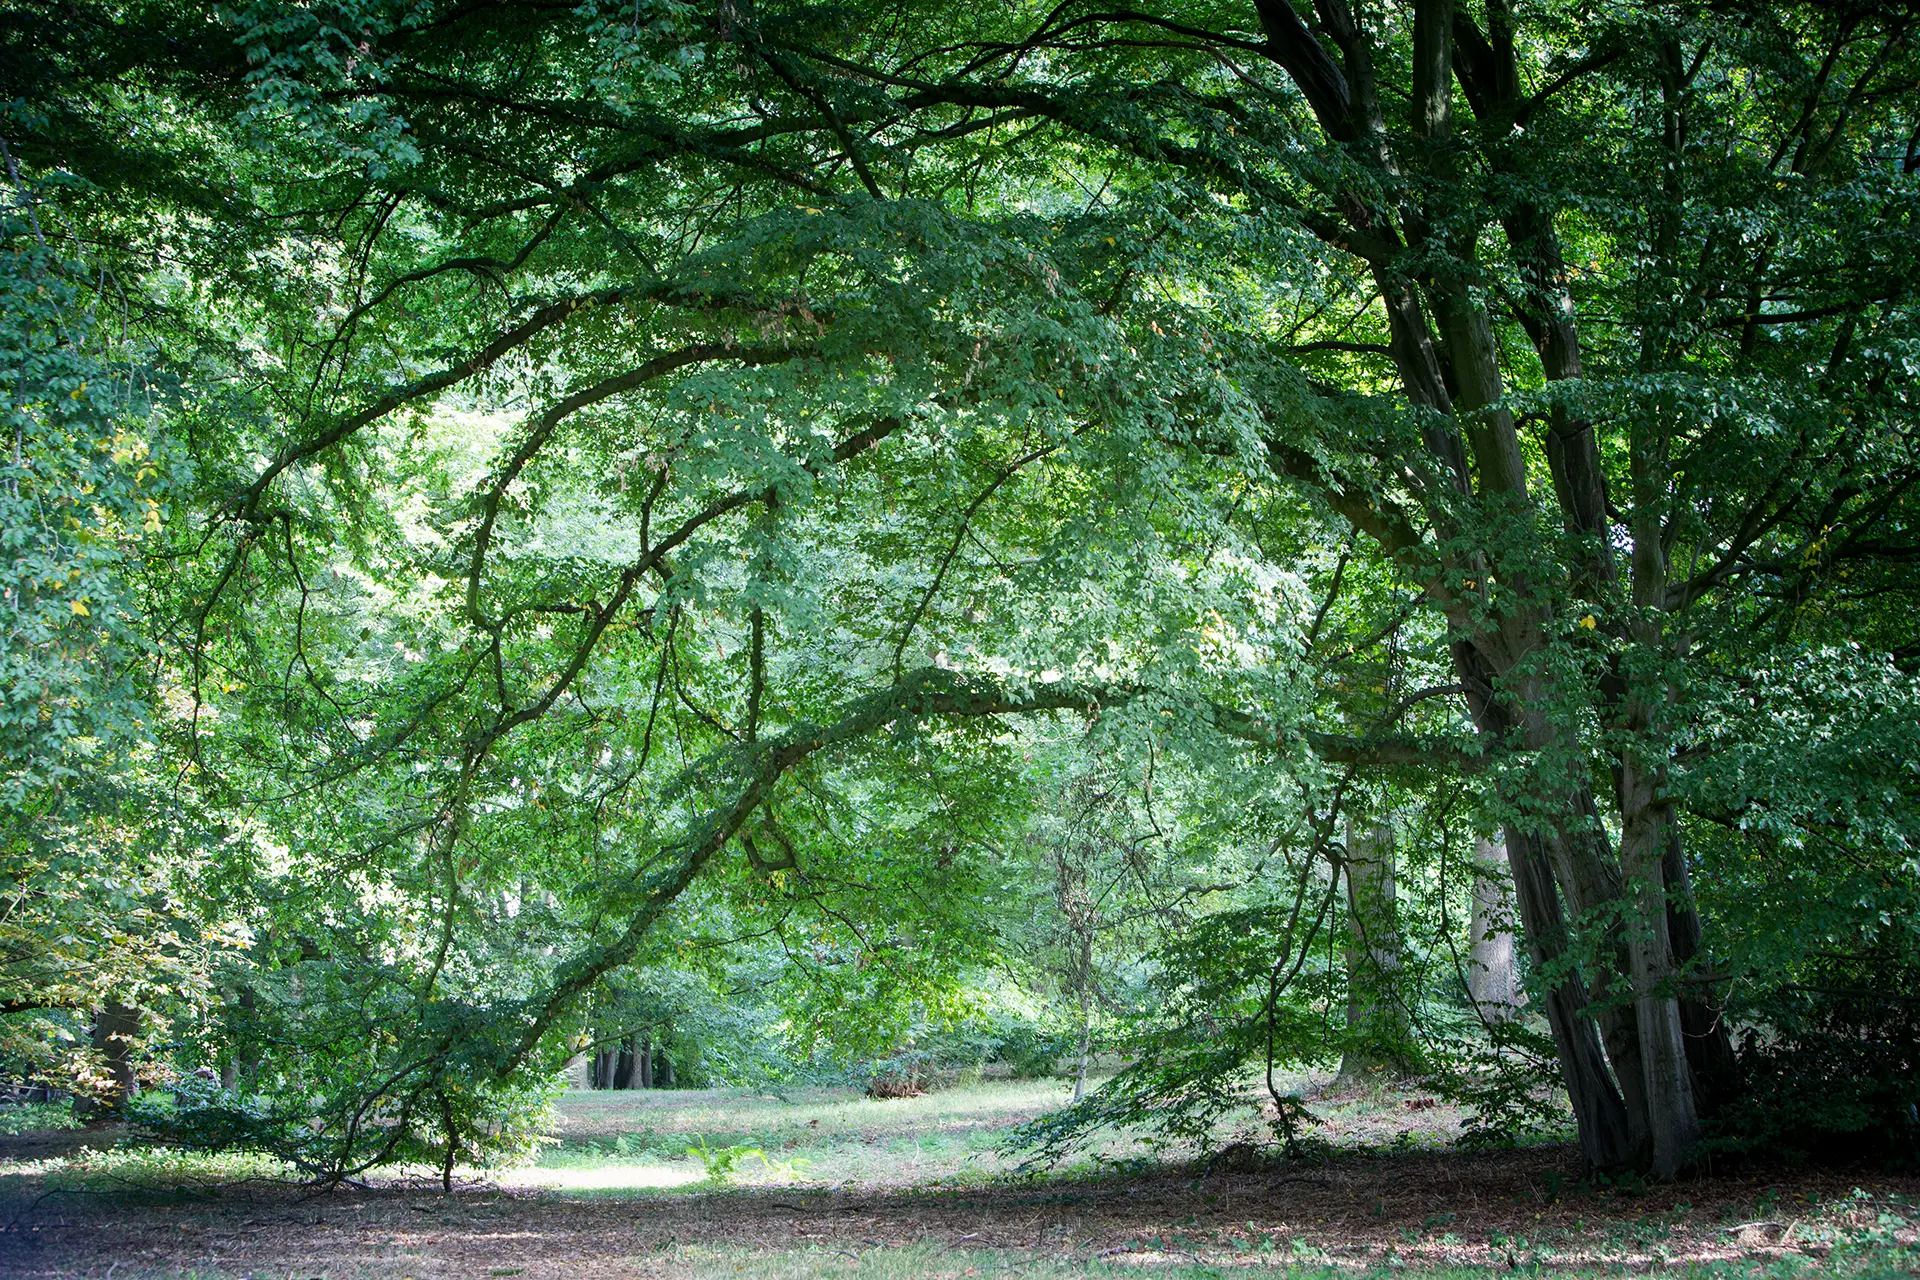 Combermere Abbey Ancient Woodlands sustainability statement